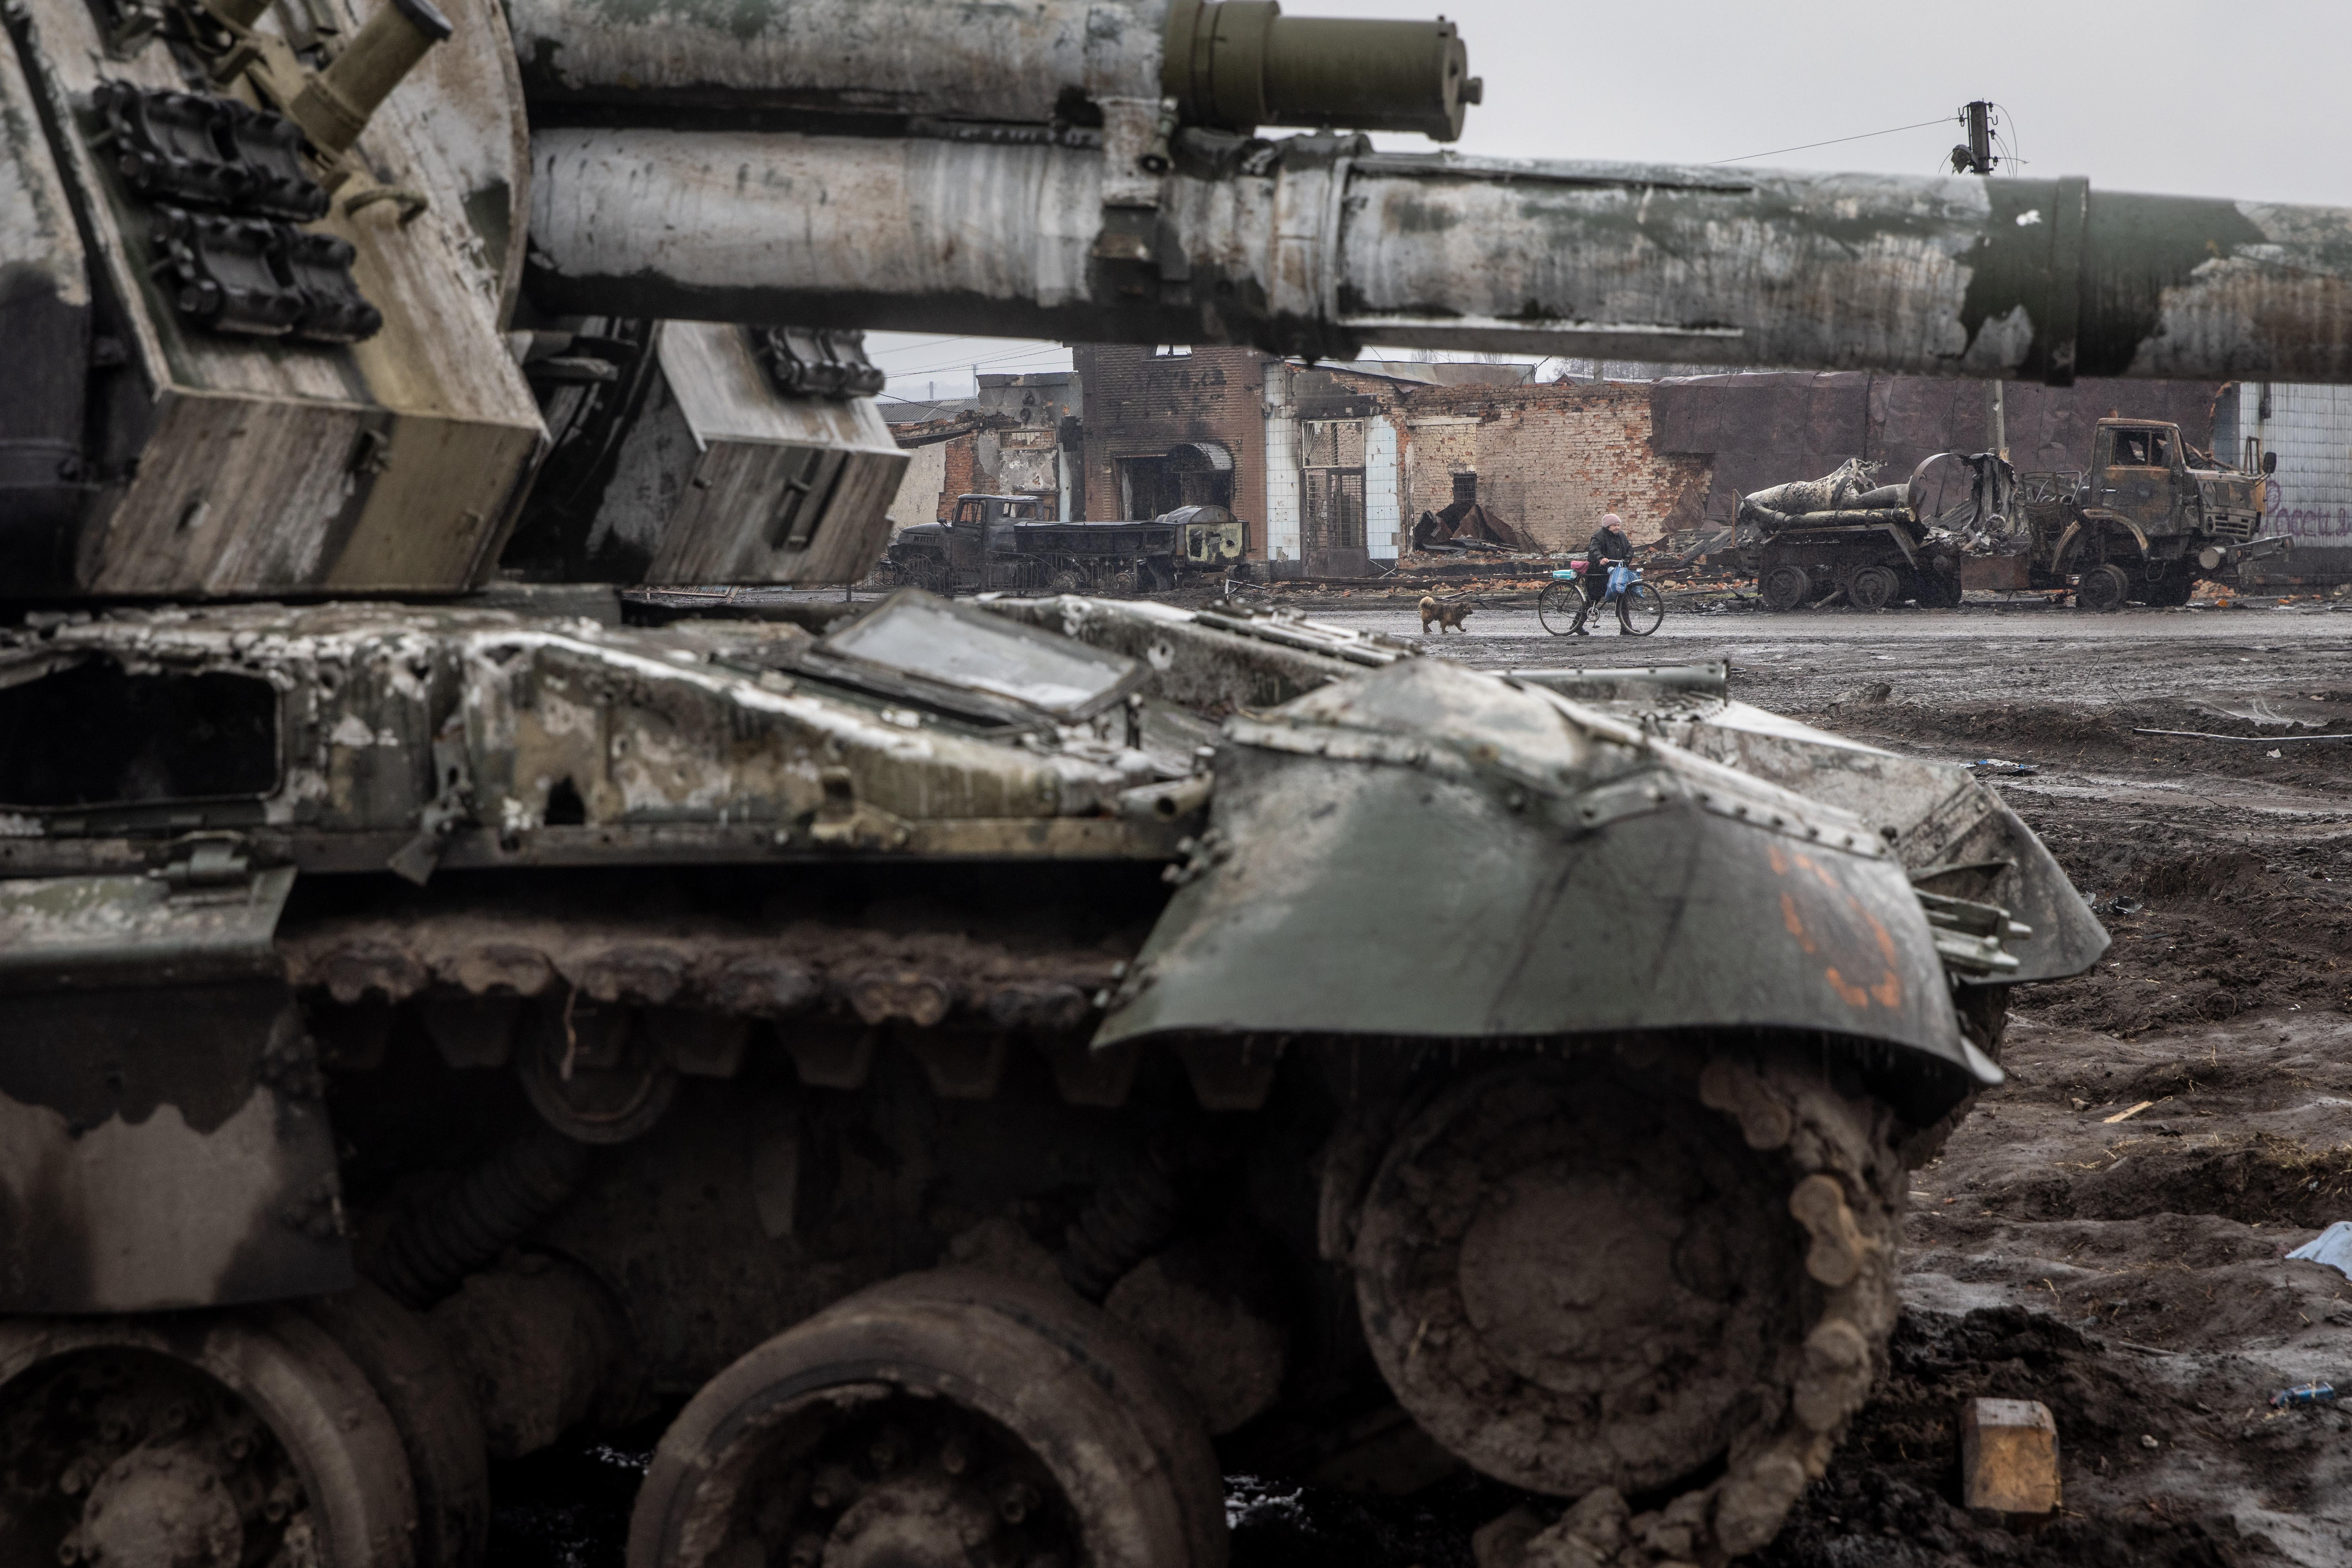 A woman and her dog walk past a destroyed Russian tank